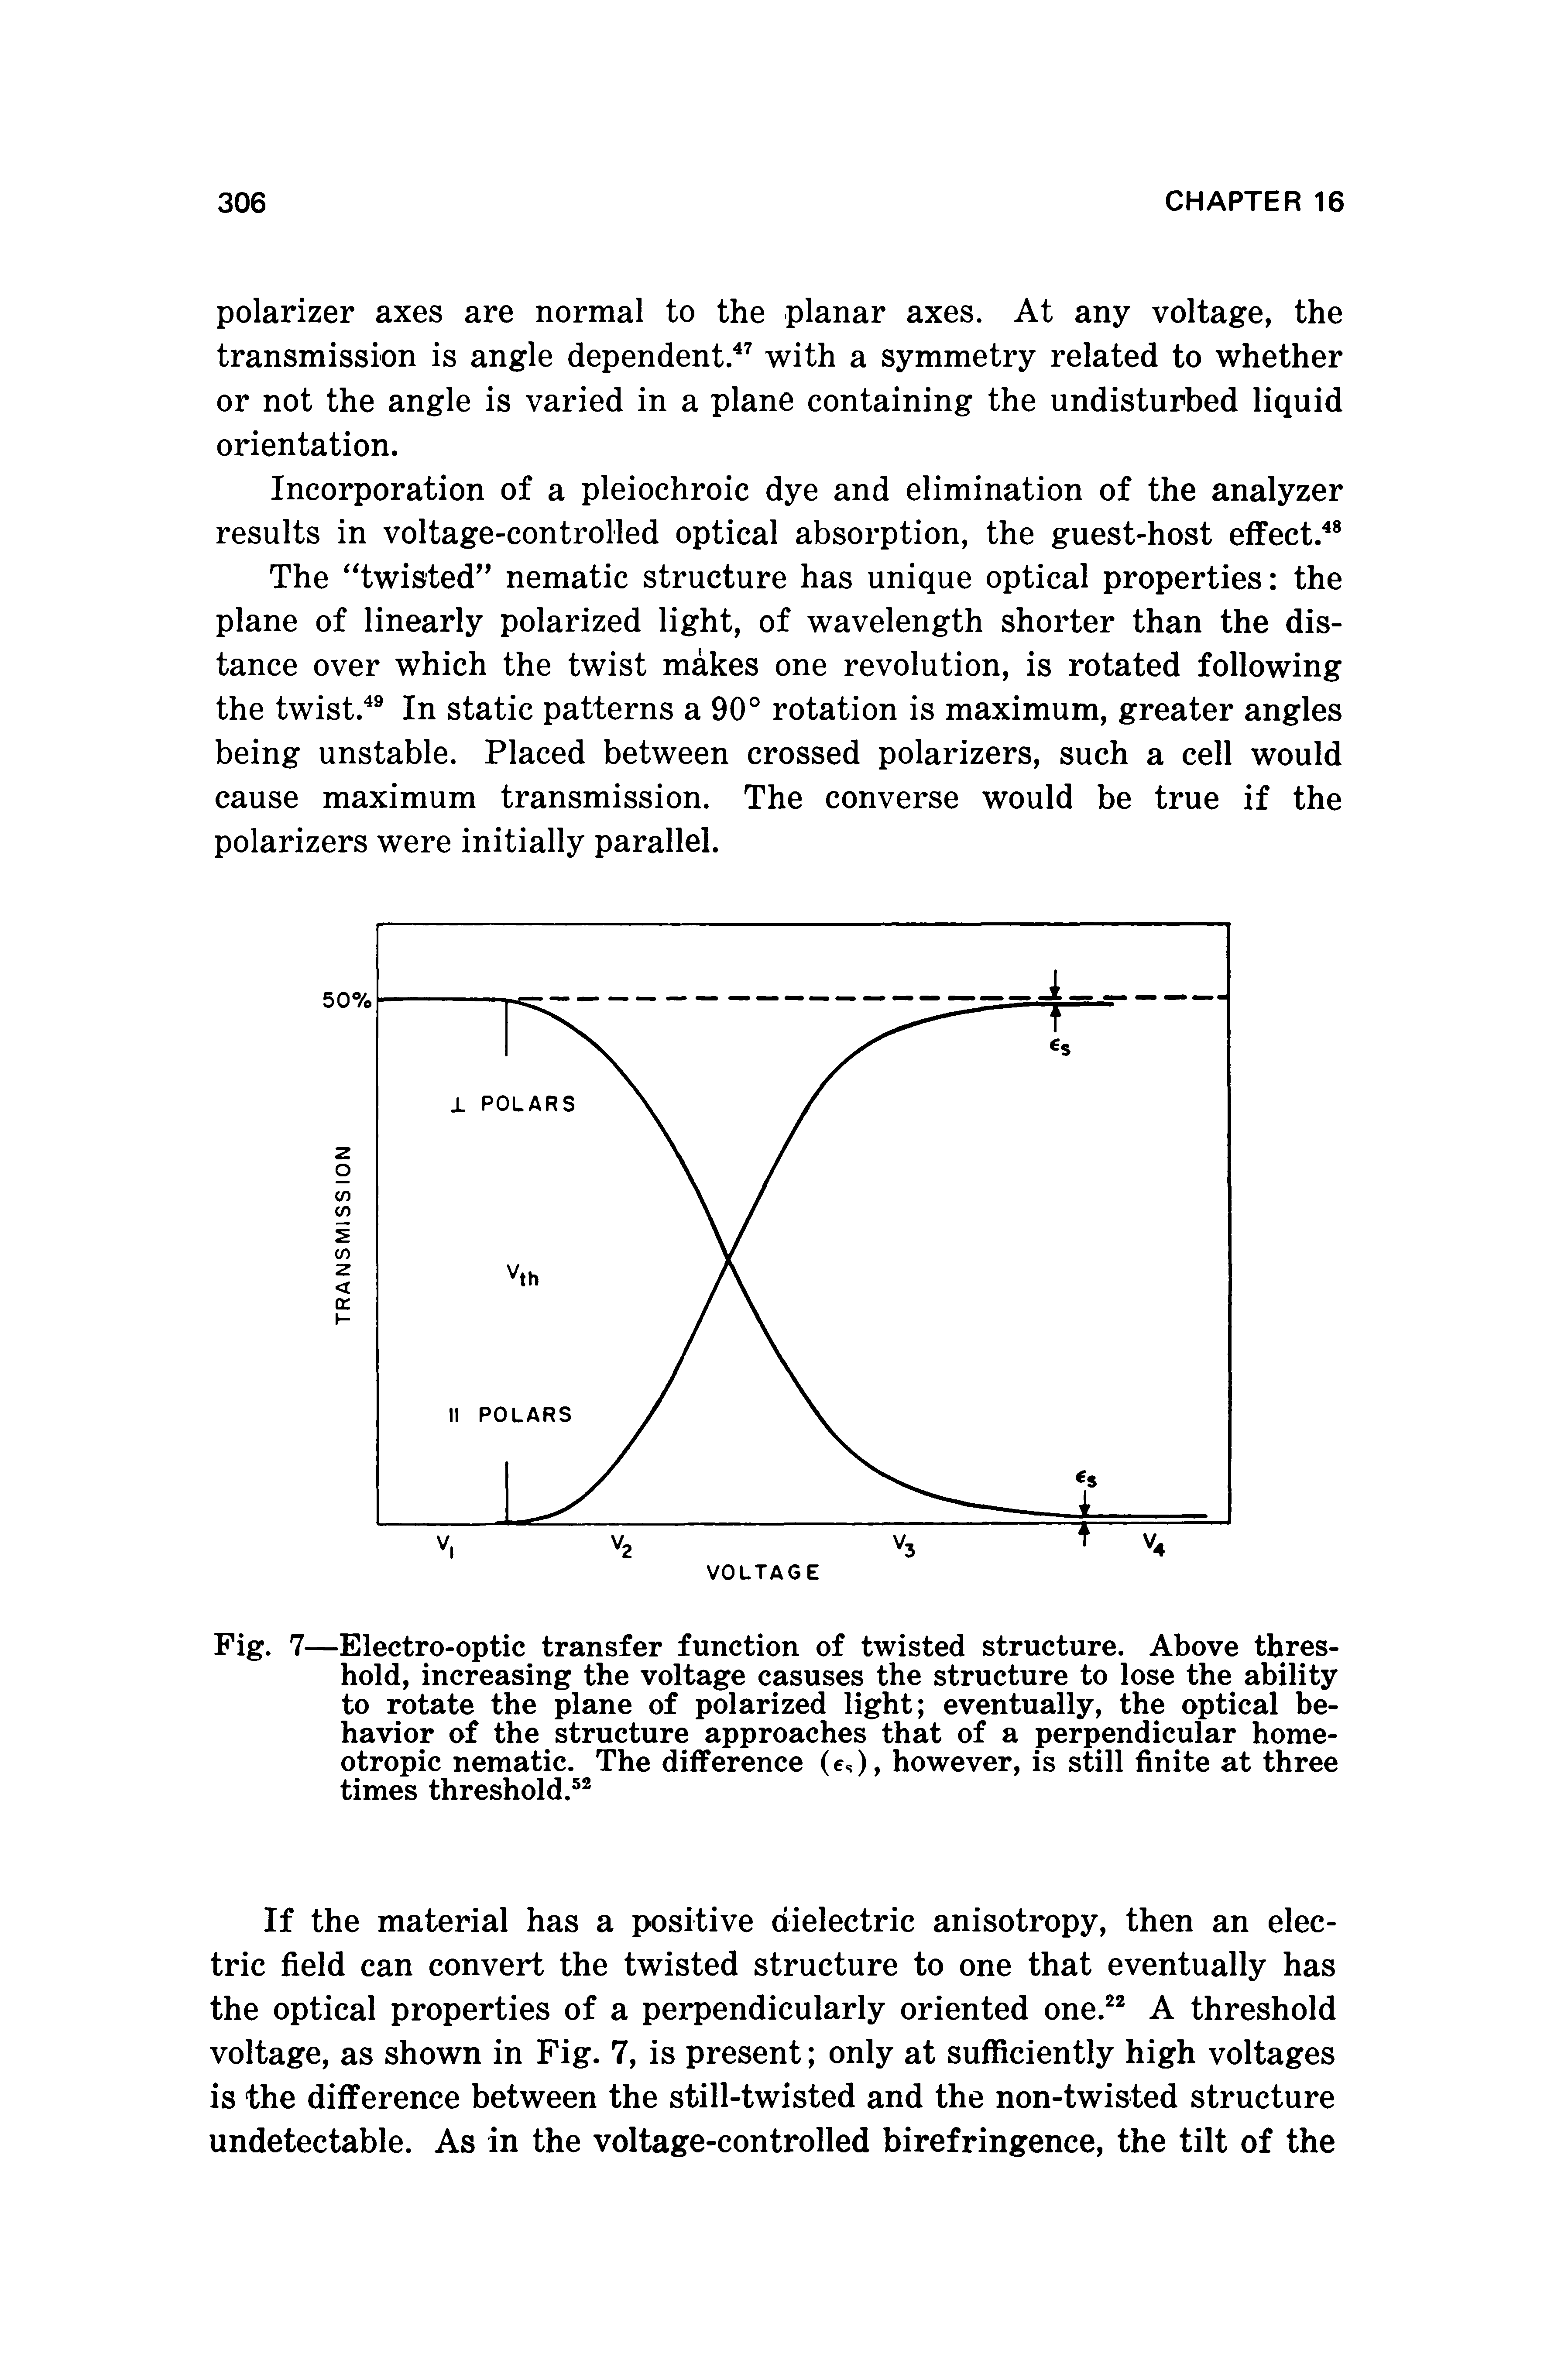 Fig. 7—Electro-optic transfer function of twisted structure. Above threshold, increasing the voltage casuses the structure to lose the ability to rotate the plane of polarized light eventually, the optical behavior of the structure approaches that of a perpendicular home-otropic nematic. The difference (e,), however, is still finite at three times threshold. ...